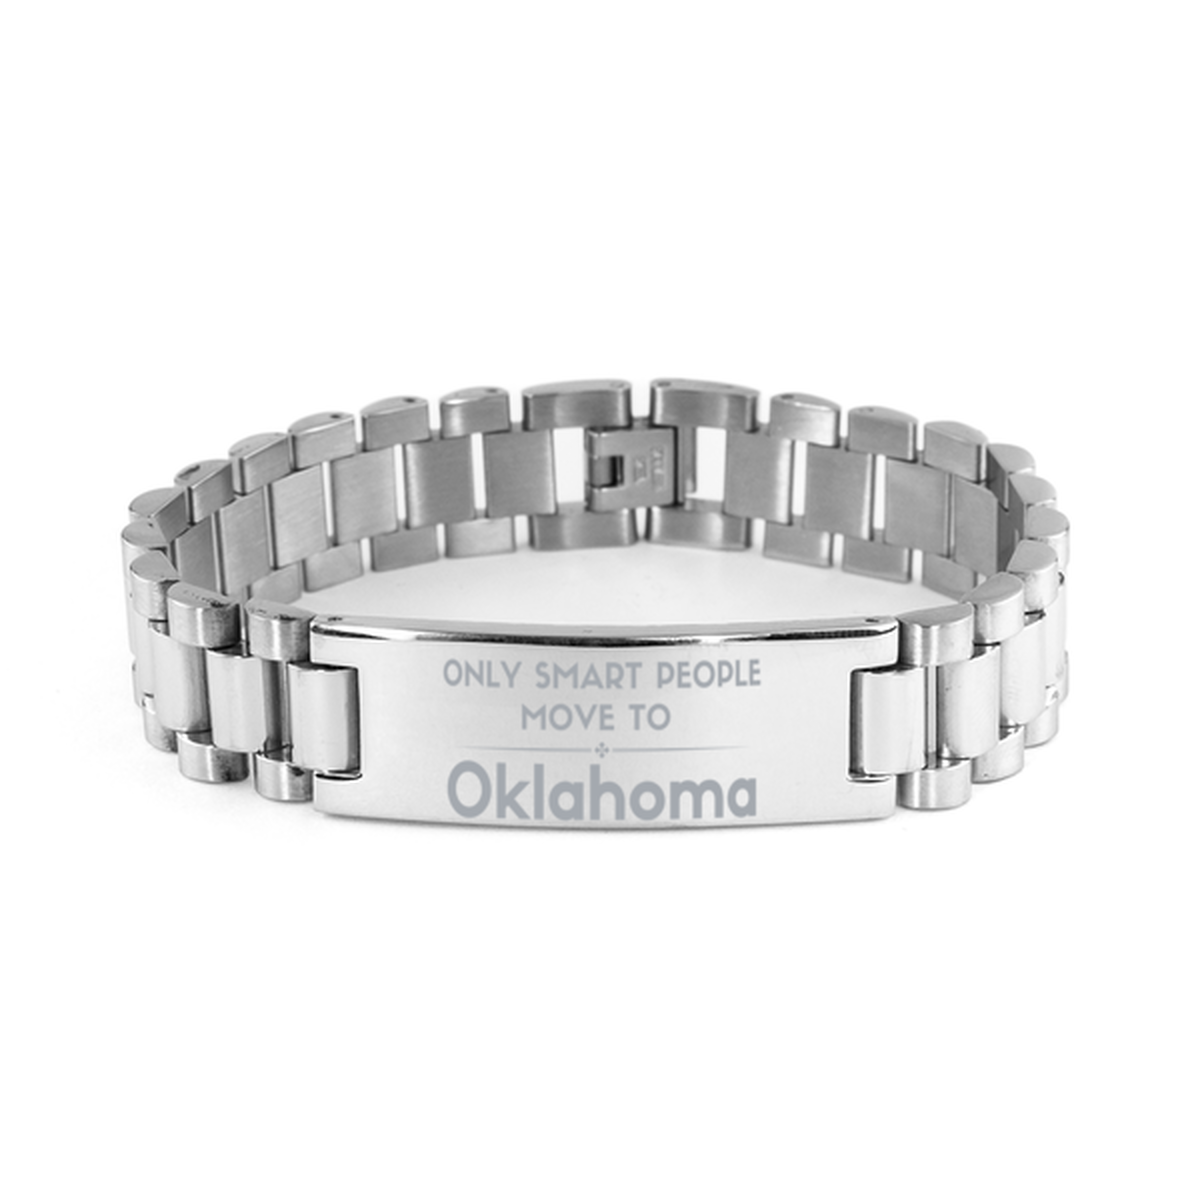 Only smart people move to Oklahoma Ladder Stainless Steel Bracelet, Gag Gifts For Oklahoma, Move to Oklahoma Gifts for Friends Coworker Funny Saying Quote